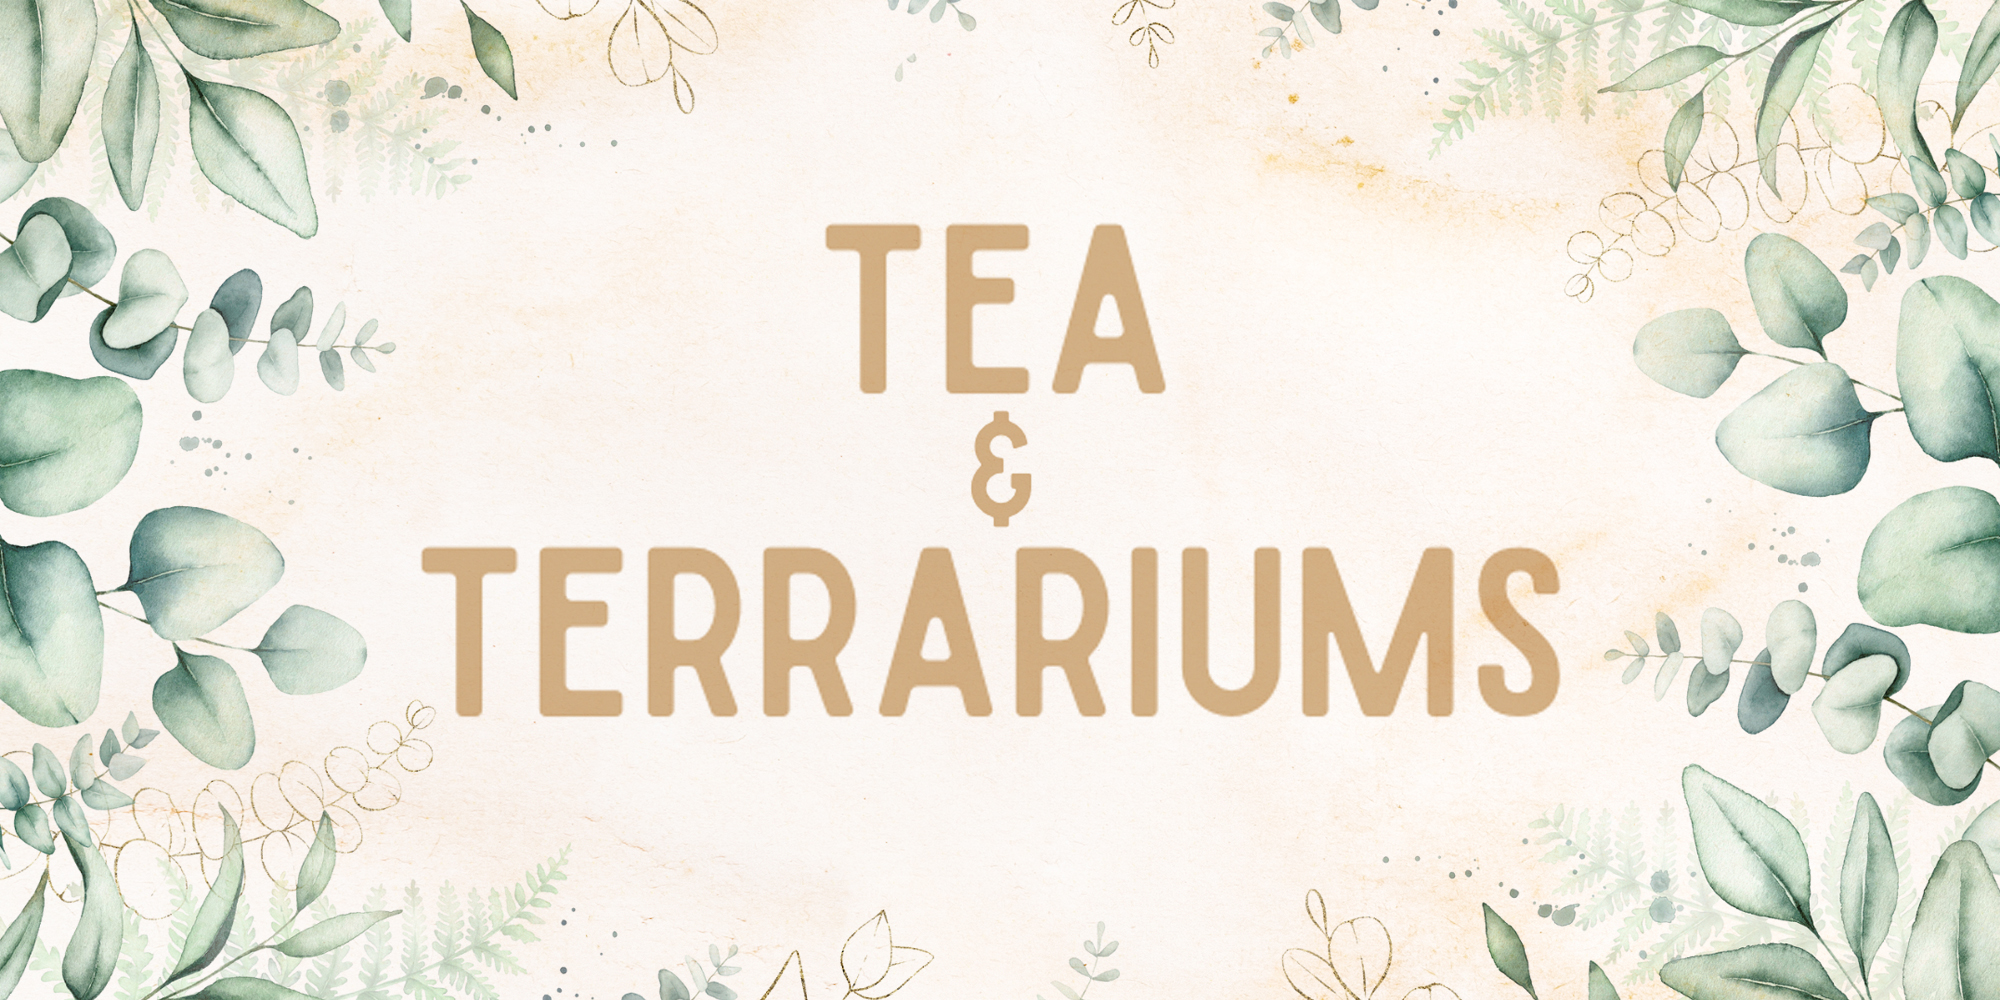 Tea & Terrariums Mother's Day Event May 12 aat 12:30pm